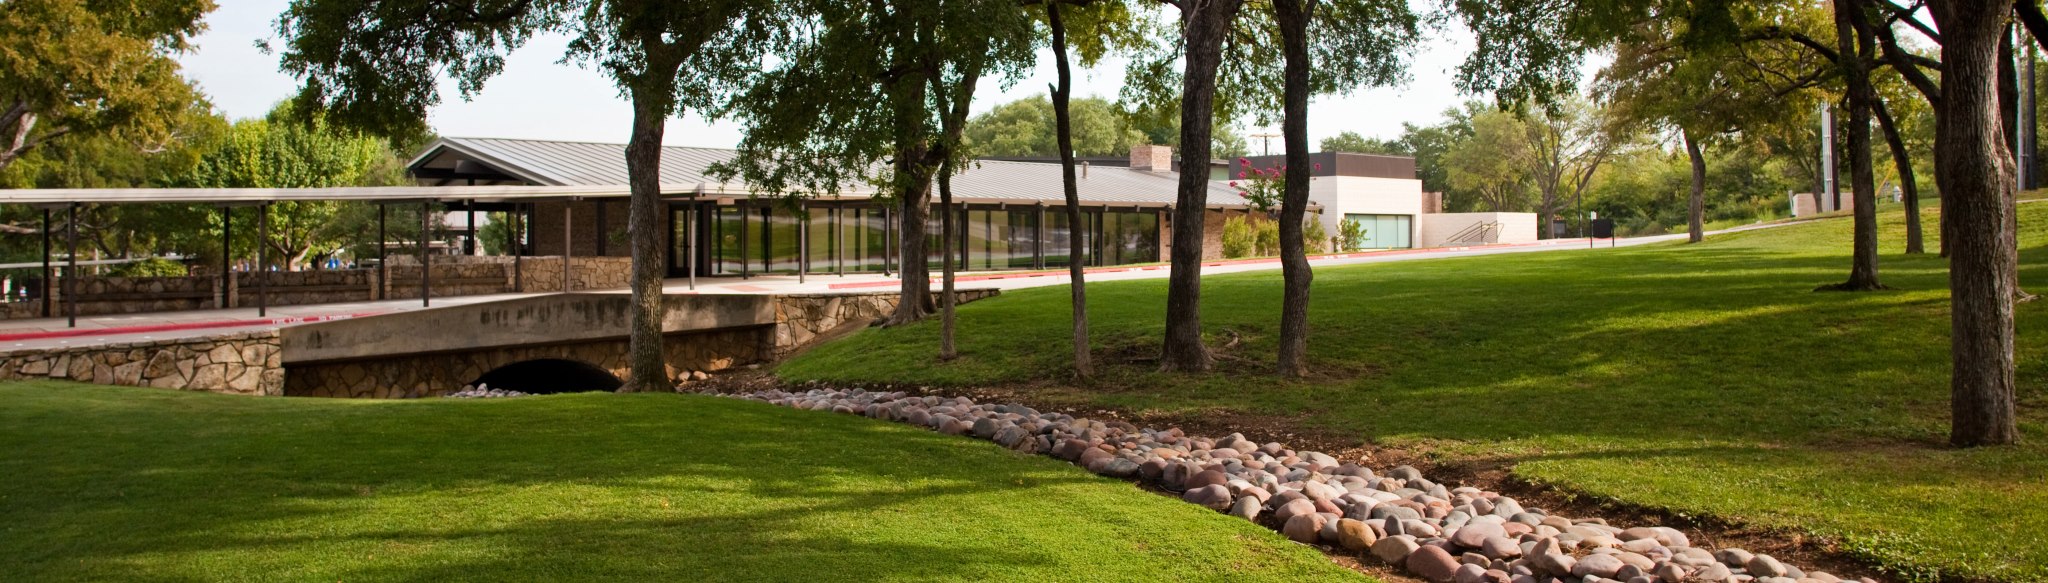 Fort Worth Country Day School – Dallas